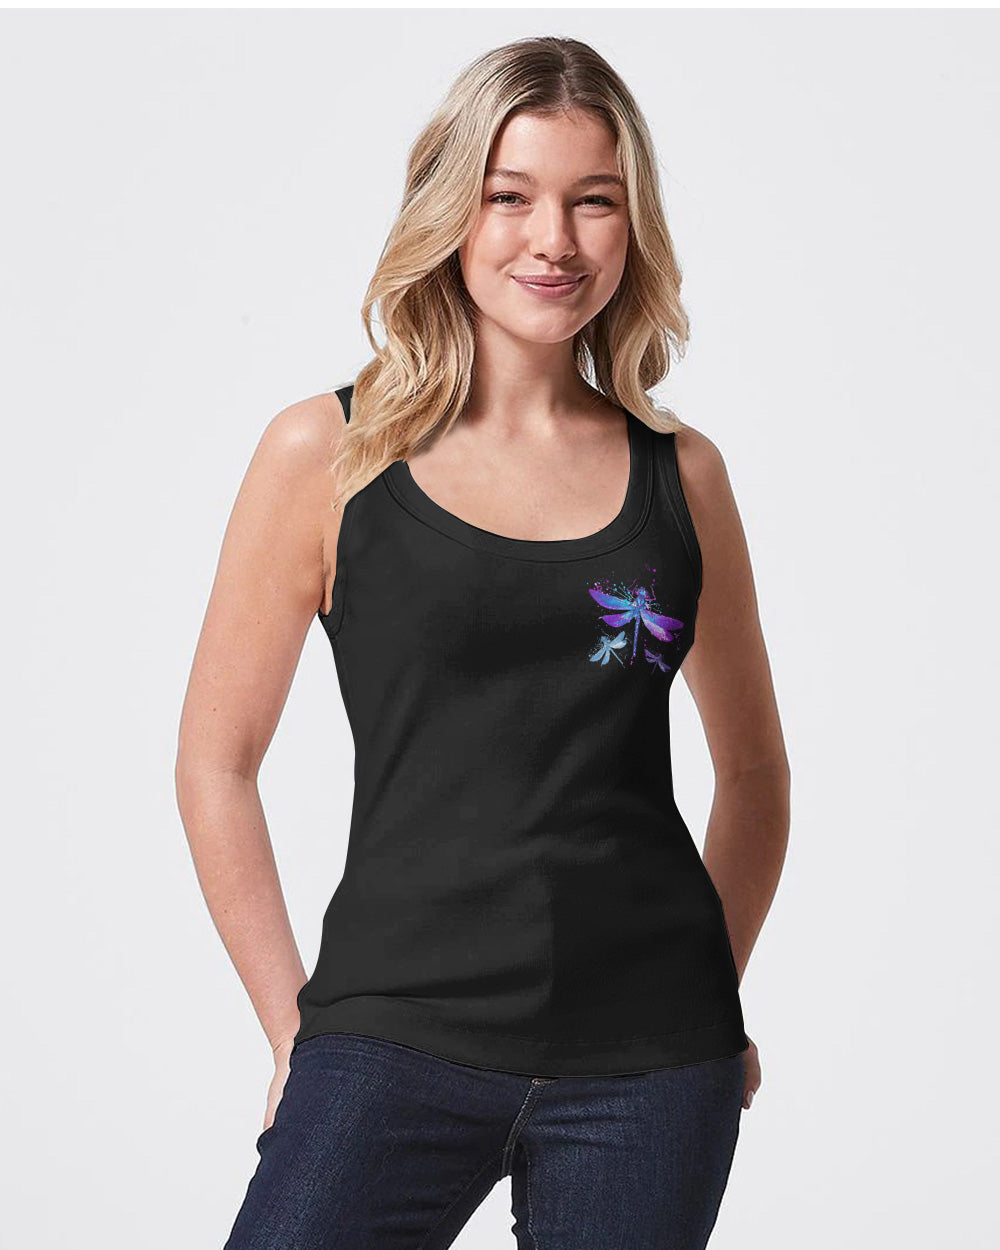 May There Be An Angel By Your Side Dragonfly Watercolor Women's Christian Tanks